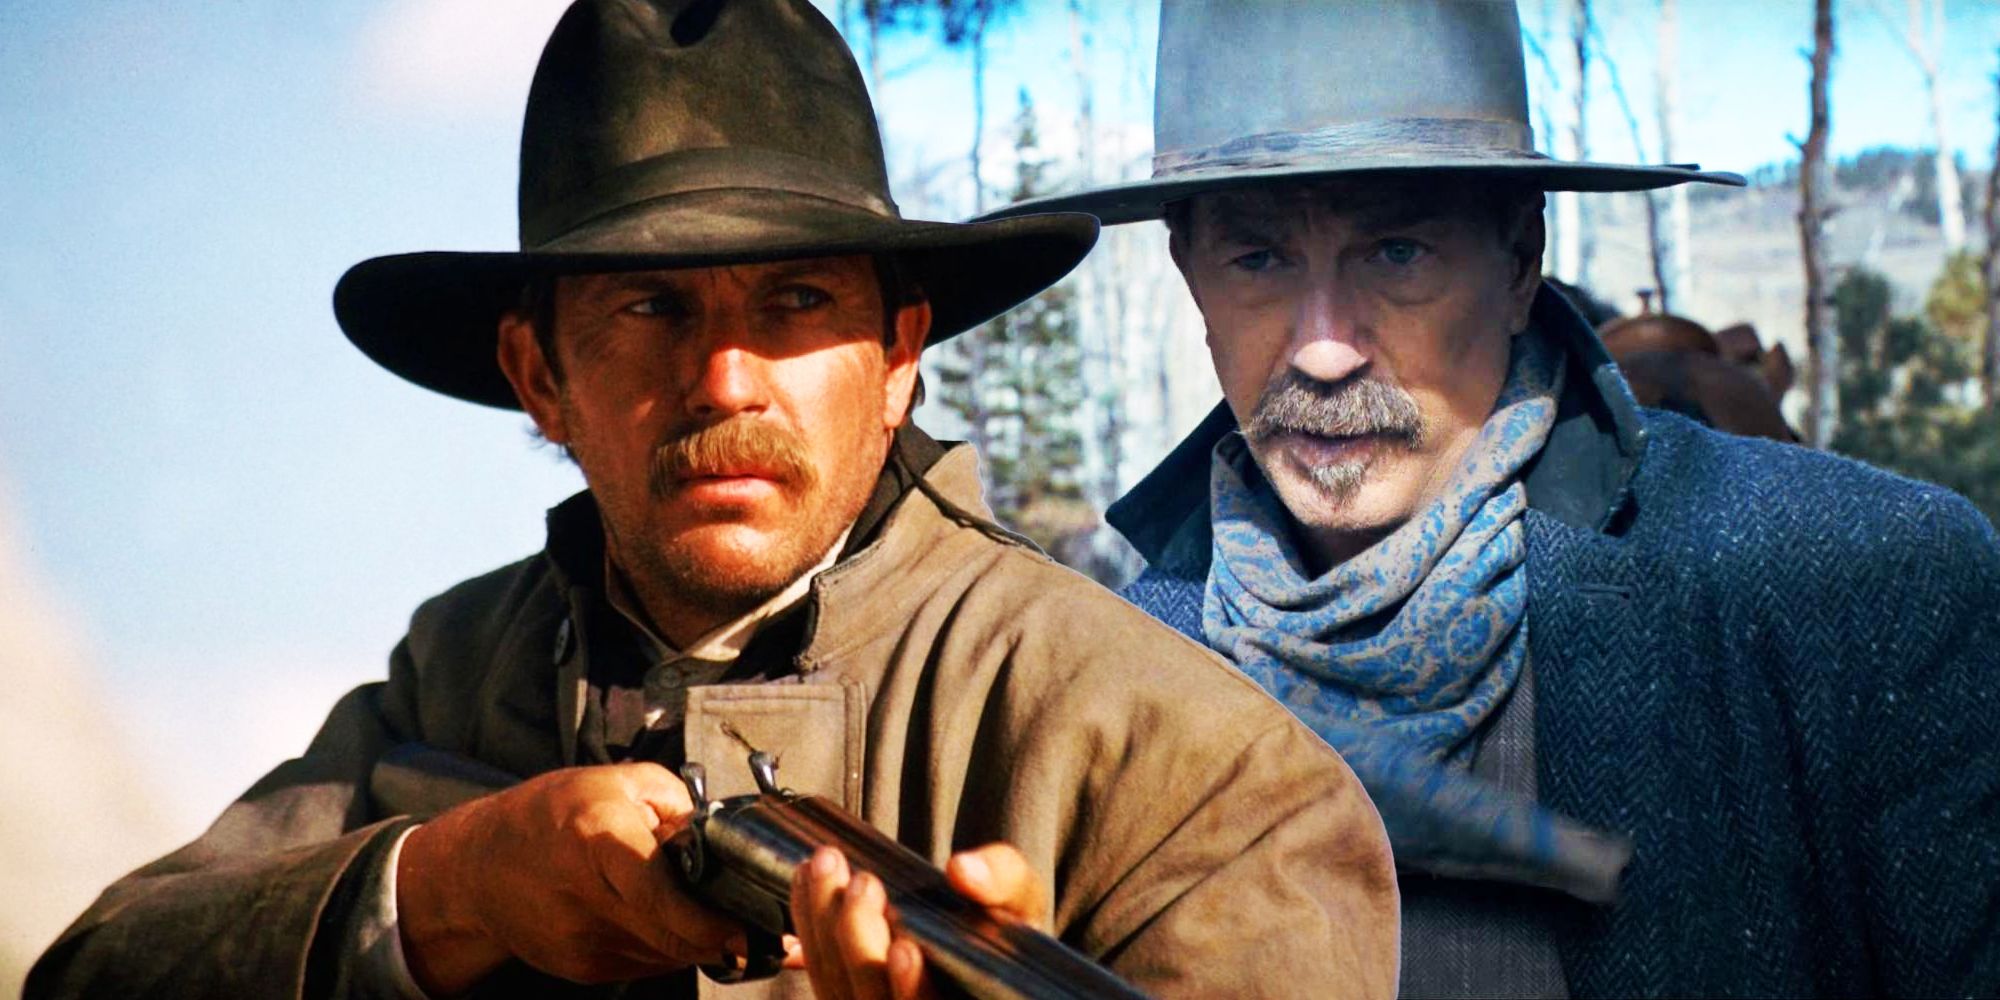 Kevin Costner’s New Western Movie Is Copying A Yellowstone Character Casting (Not John Dutton)